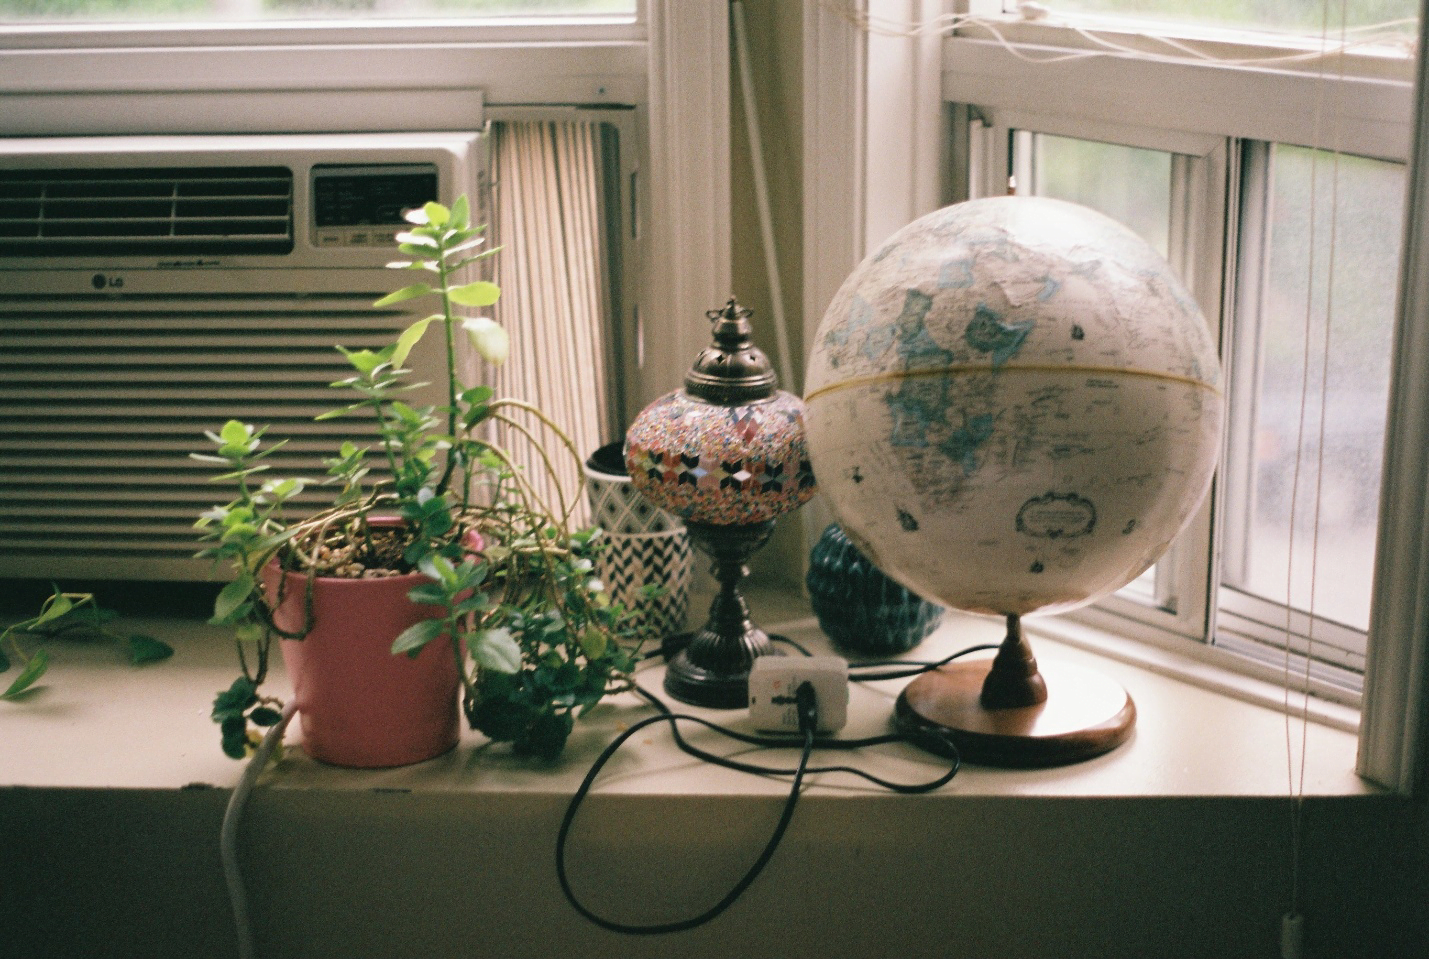 A globe and plants on a window sill

Description automatically generated with low confidence